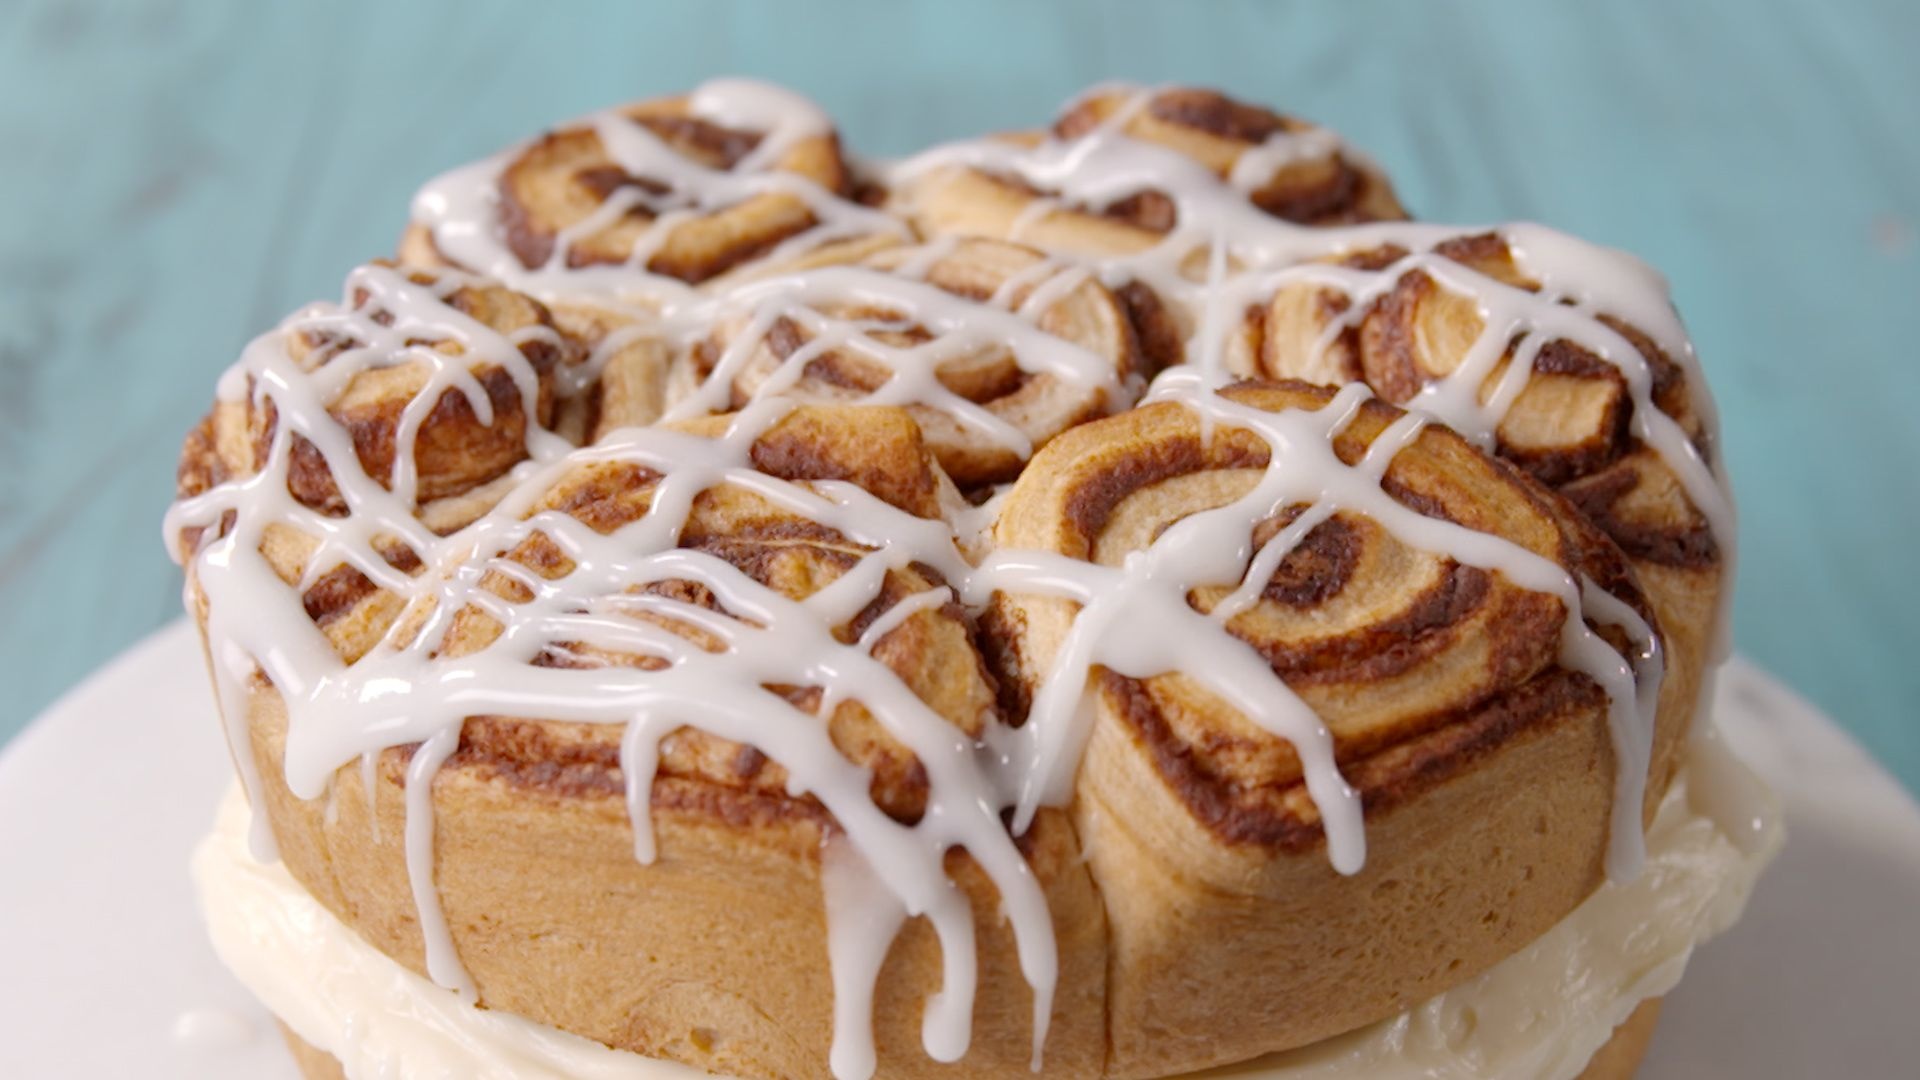 Cinnamon roll: Served warm, The heat helps to enhance the flavors. 1920x1080 Full HD Wallpaper.